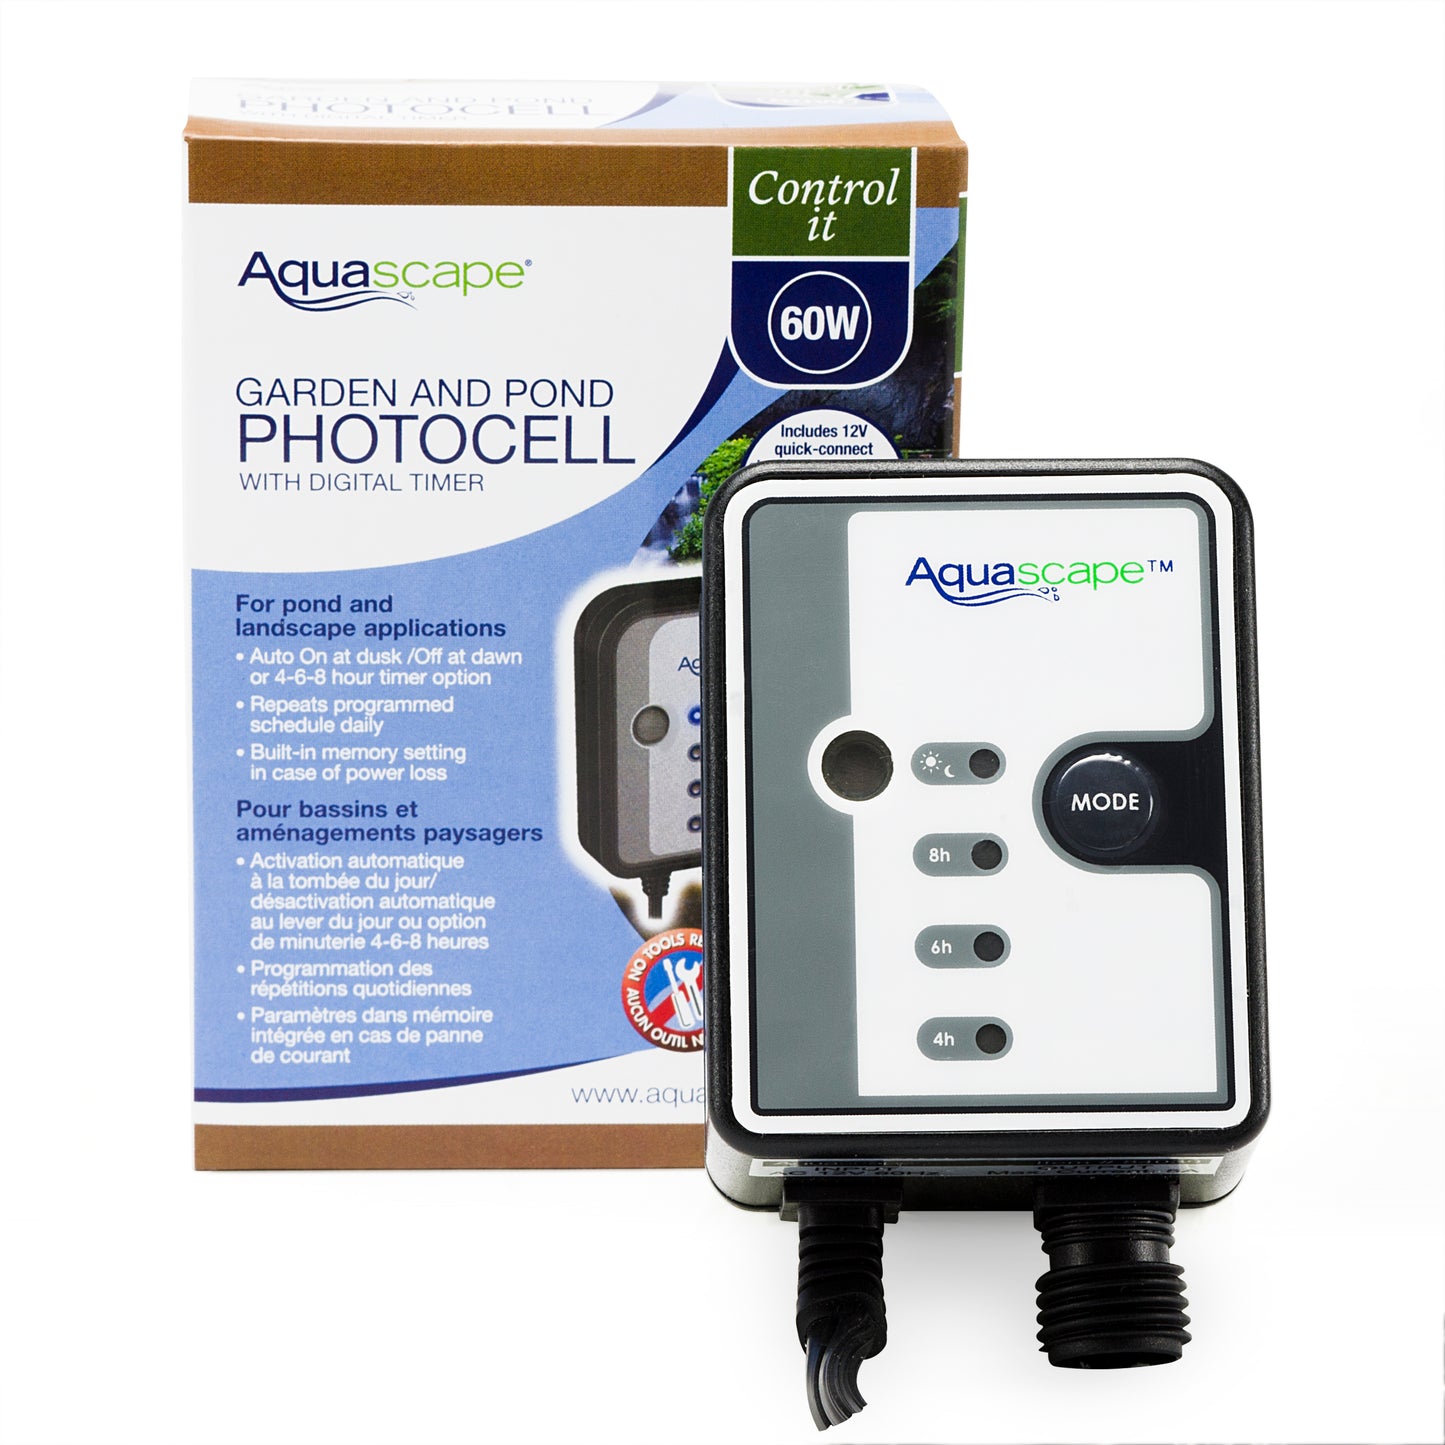 Garden and Pond Photocell with Digital Timer